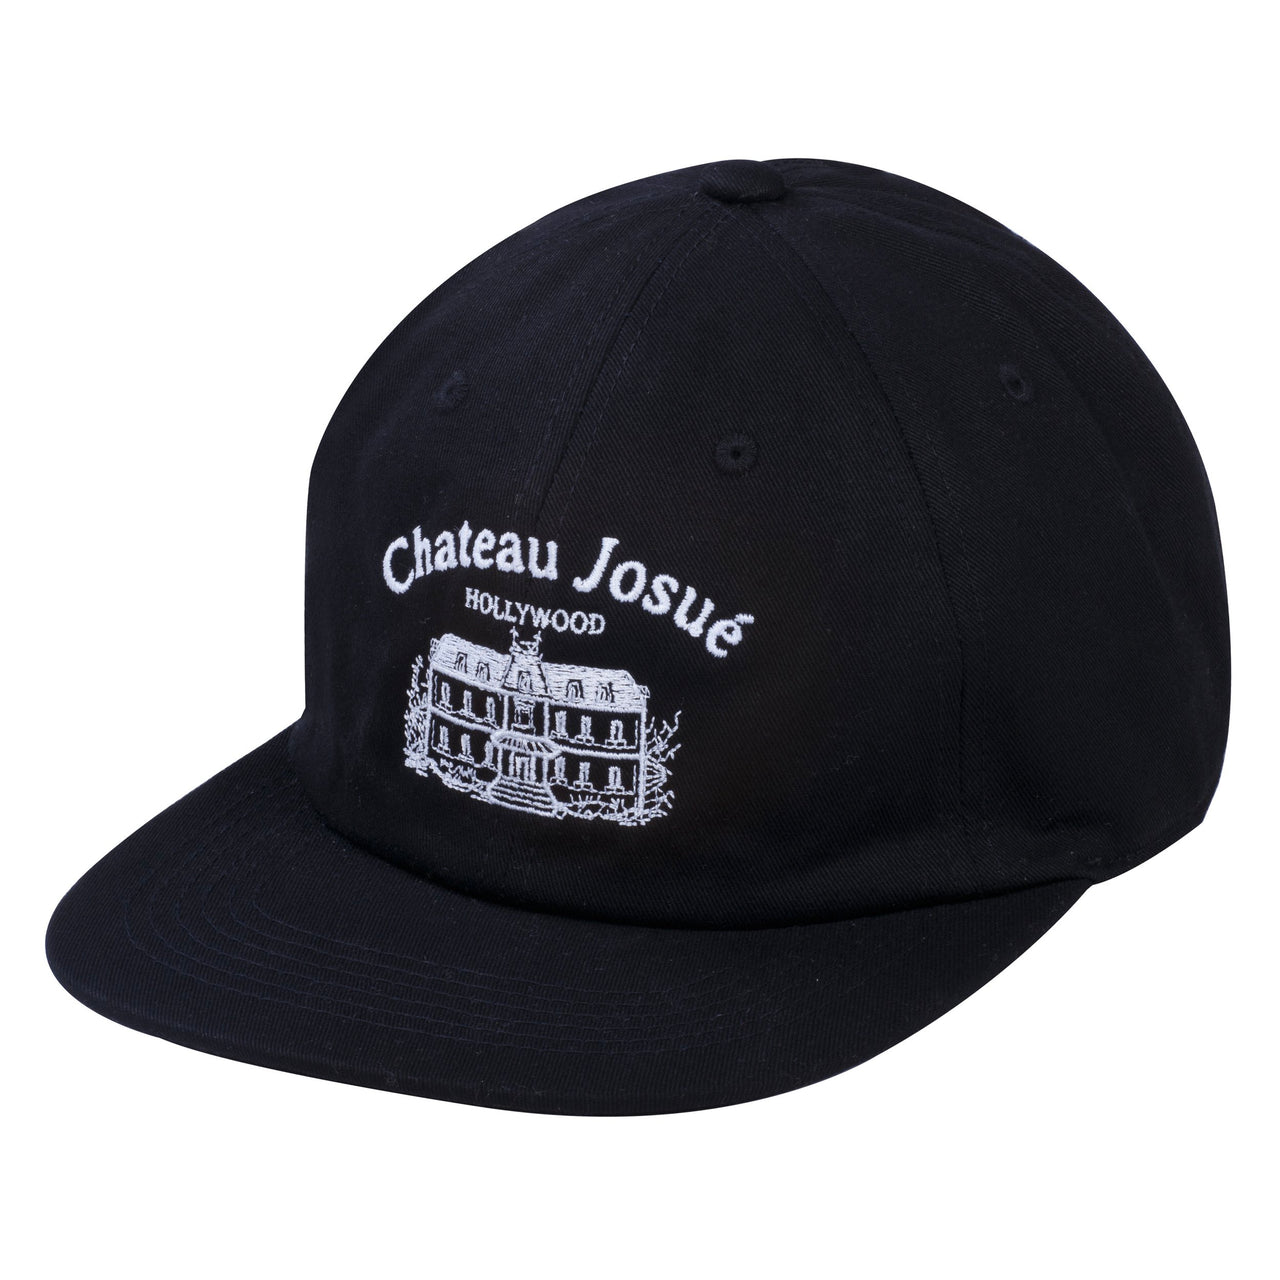 Gallery Dept. Chateau Josué Embroidered Cotton-Twill Baseball Cap Black